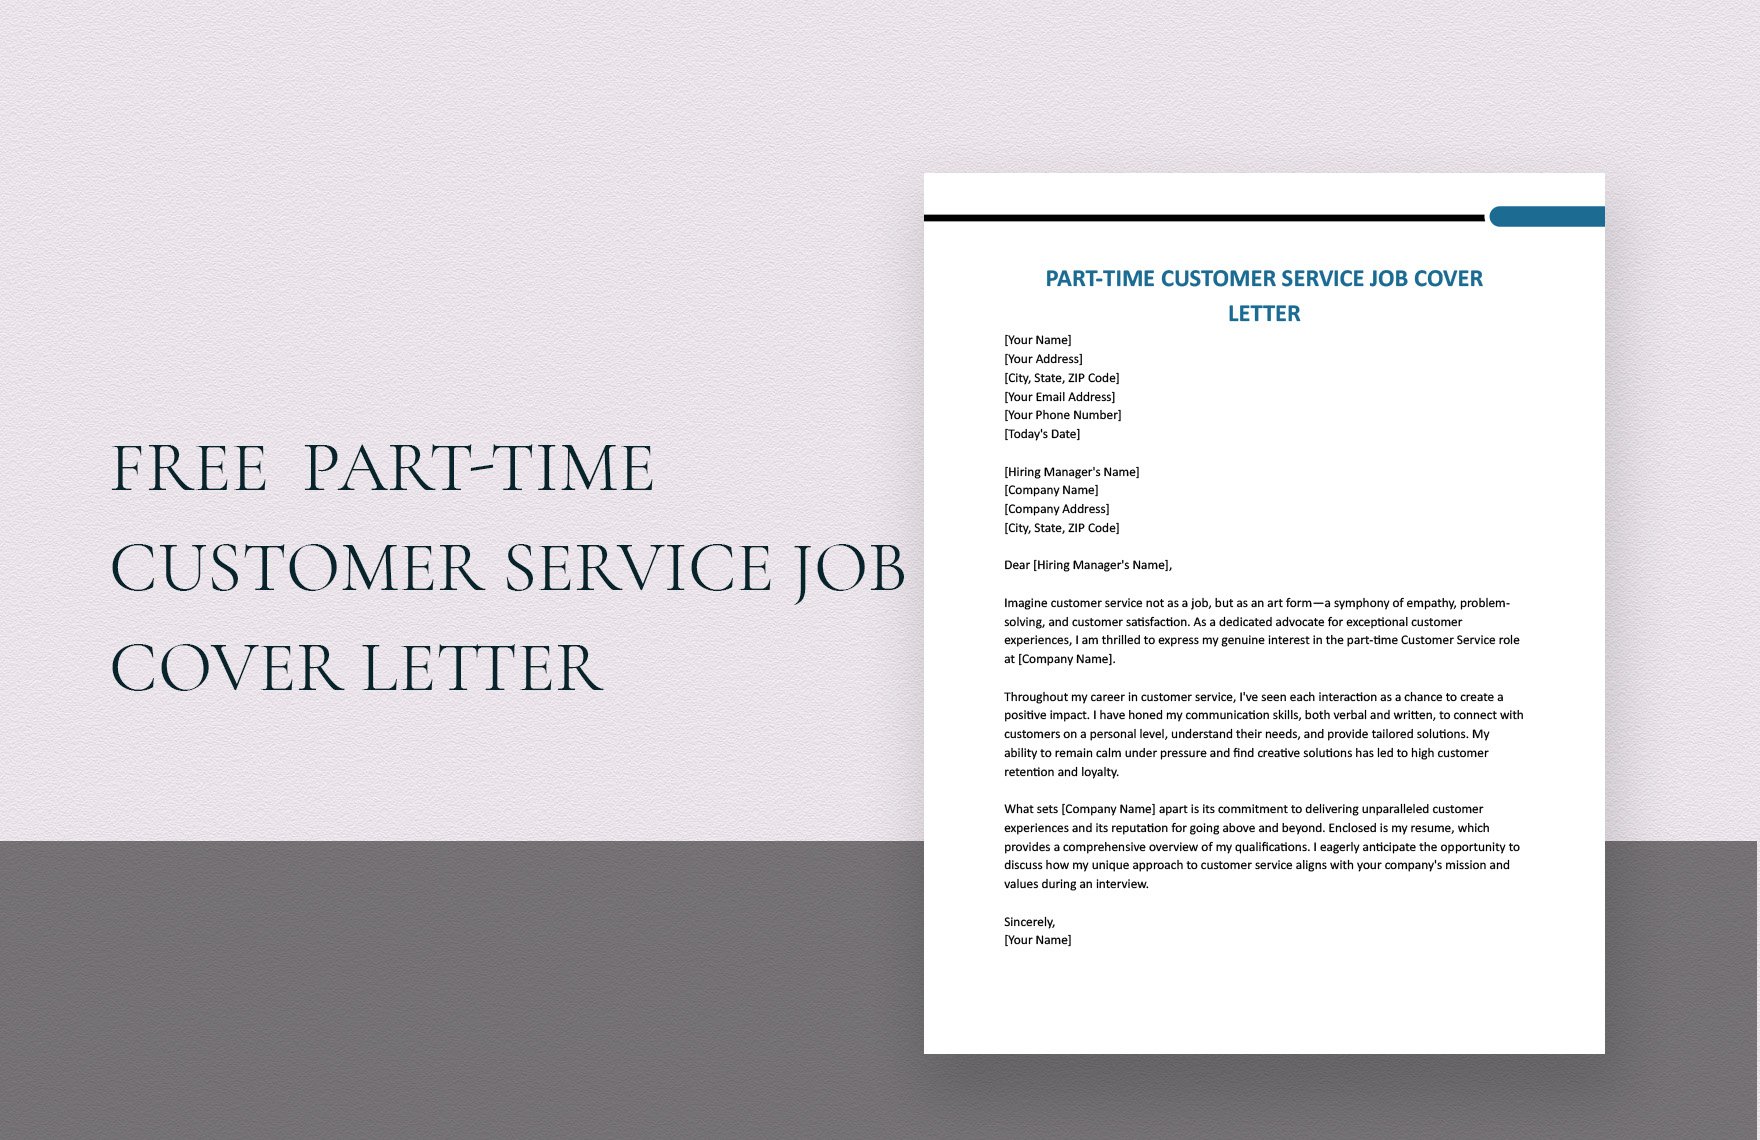 Part-Time Customer Service Job Cover Letter Template